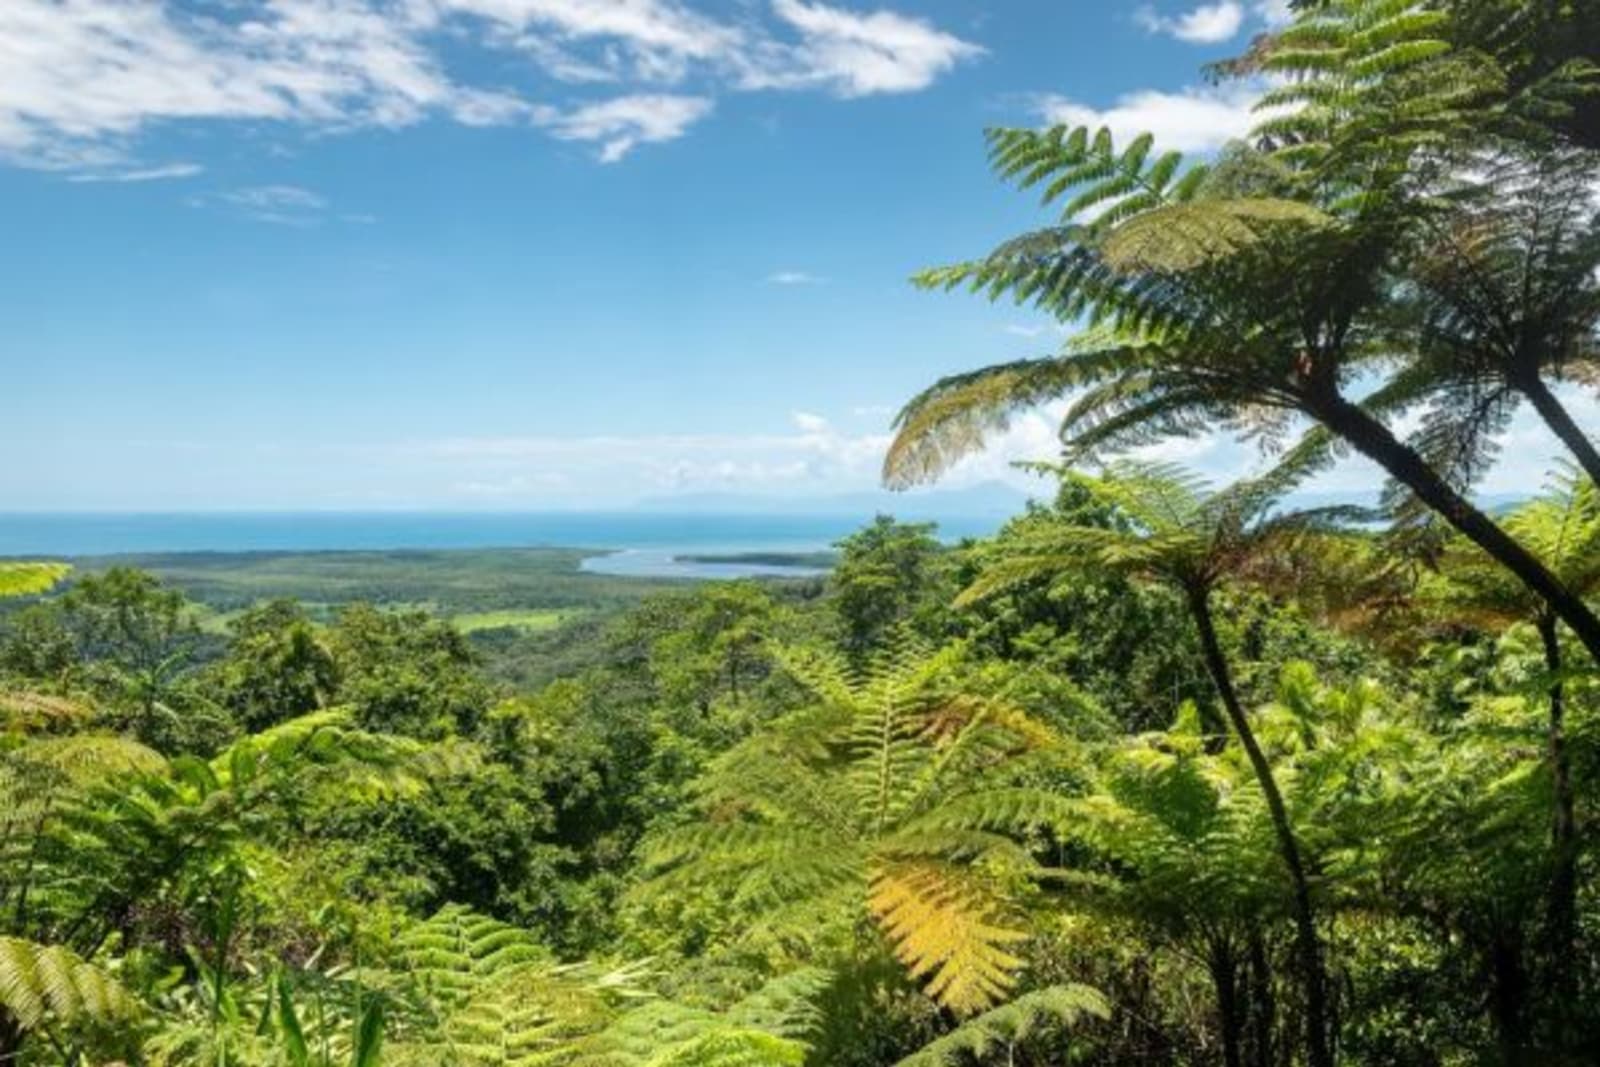 Distant shot of bush land and ocean in Daintree National Park